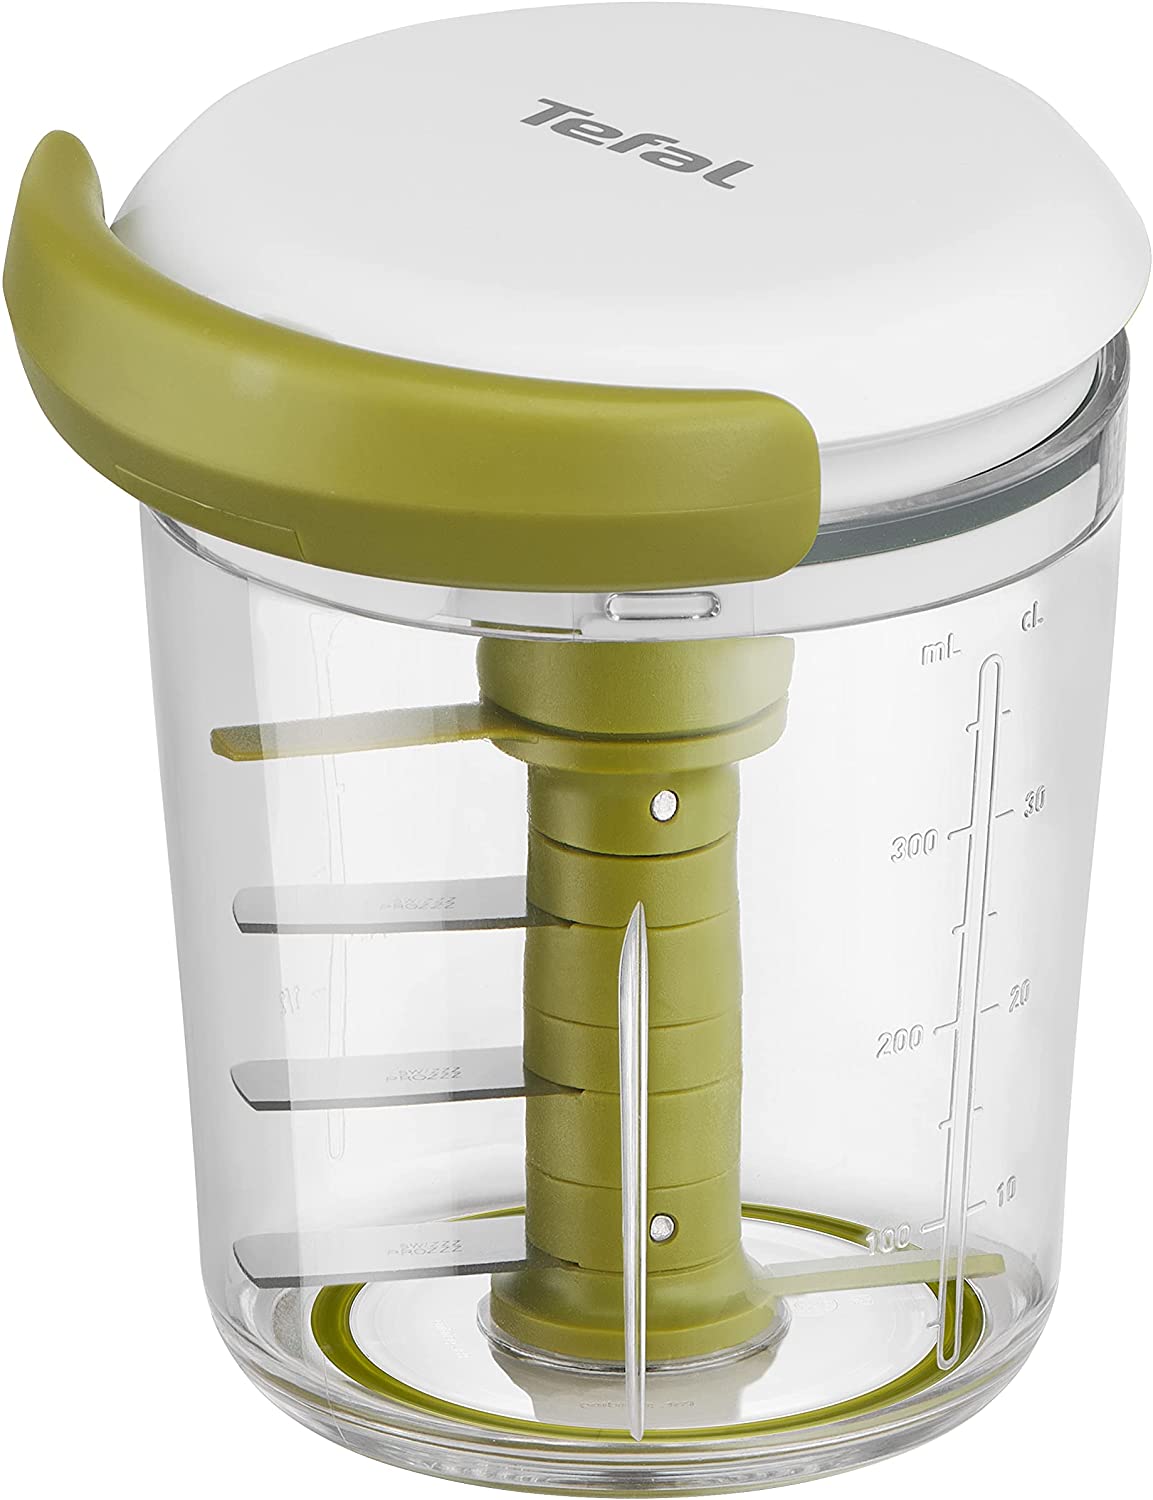 Tefal 5 Second Chopper Shaker K16441 - 5 Seconds Hand Chopper 450ml Thick, Medium and Fine Stainless Steel Blades, No Electricity, Non-Slip Base and Easy to Clean